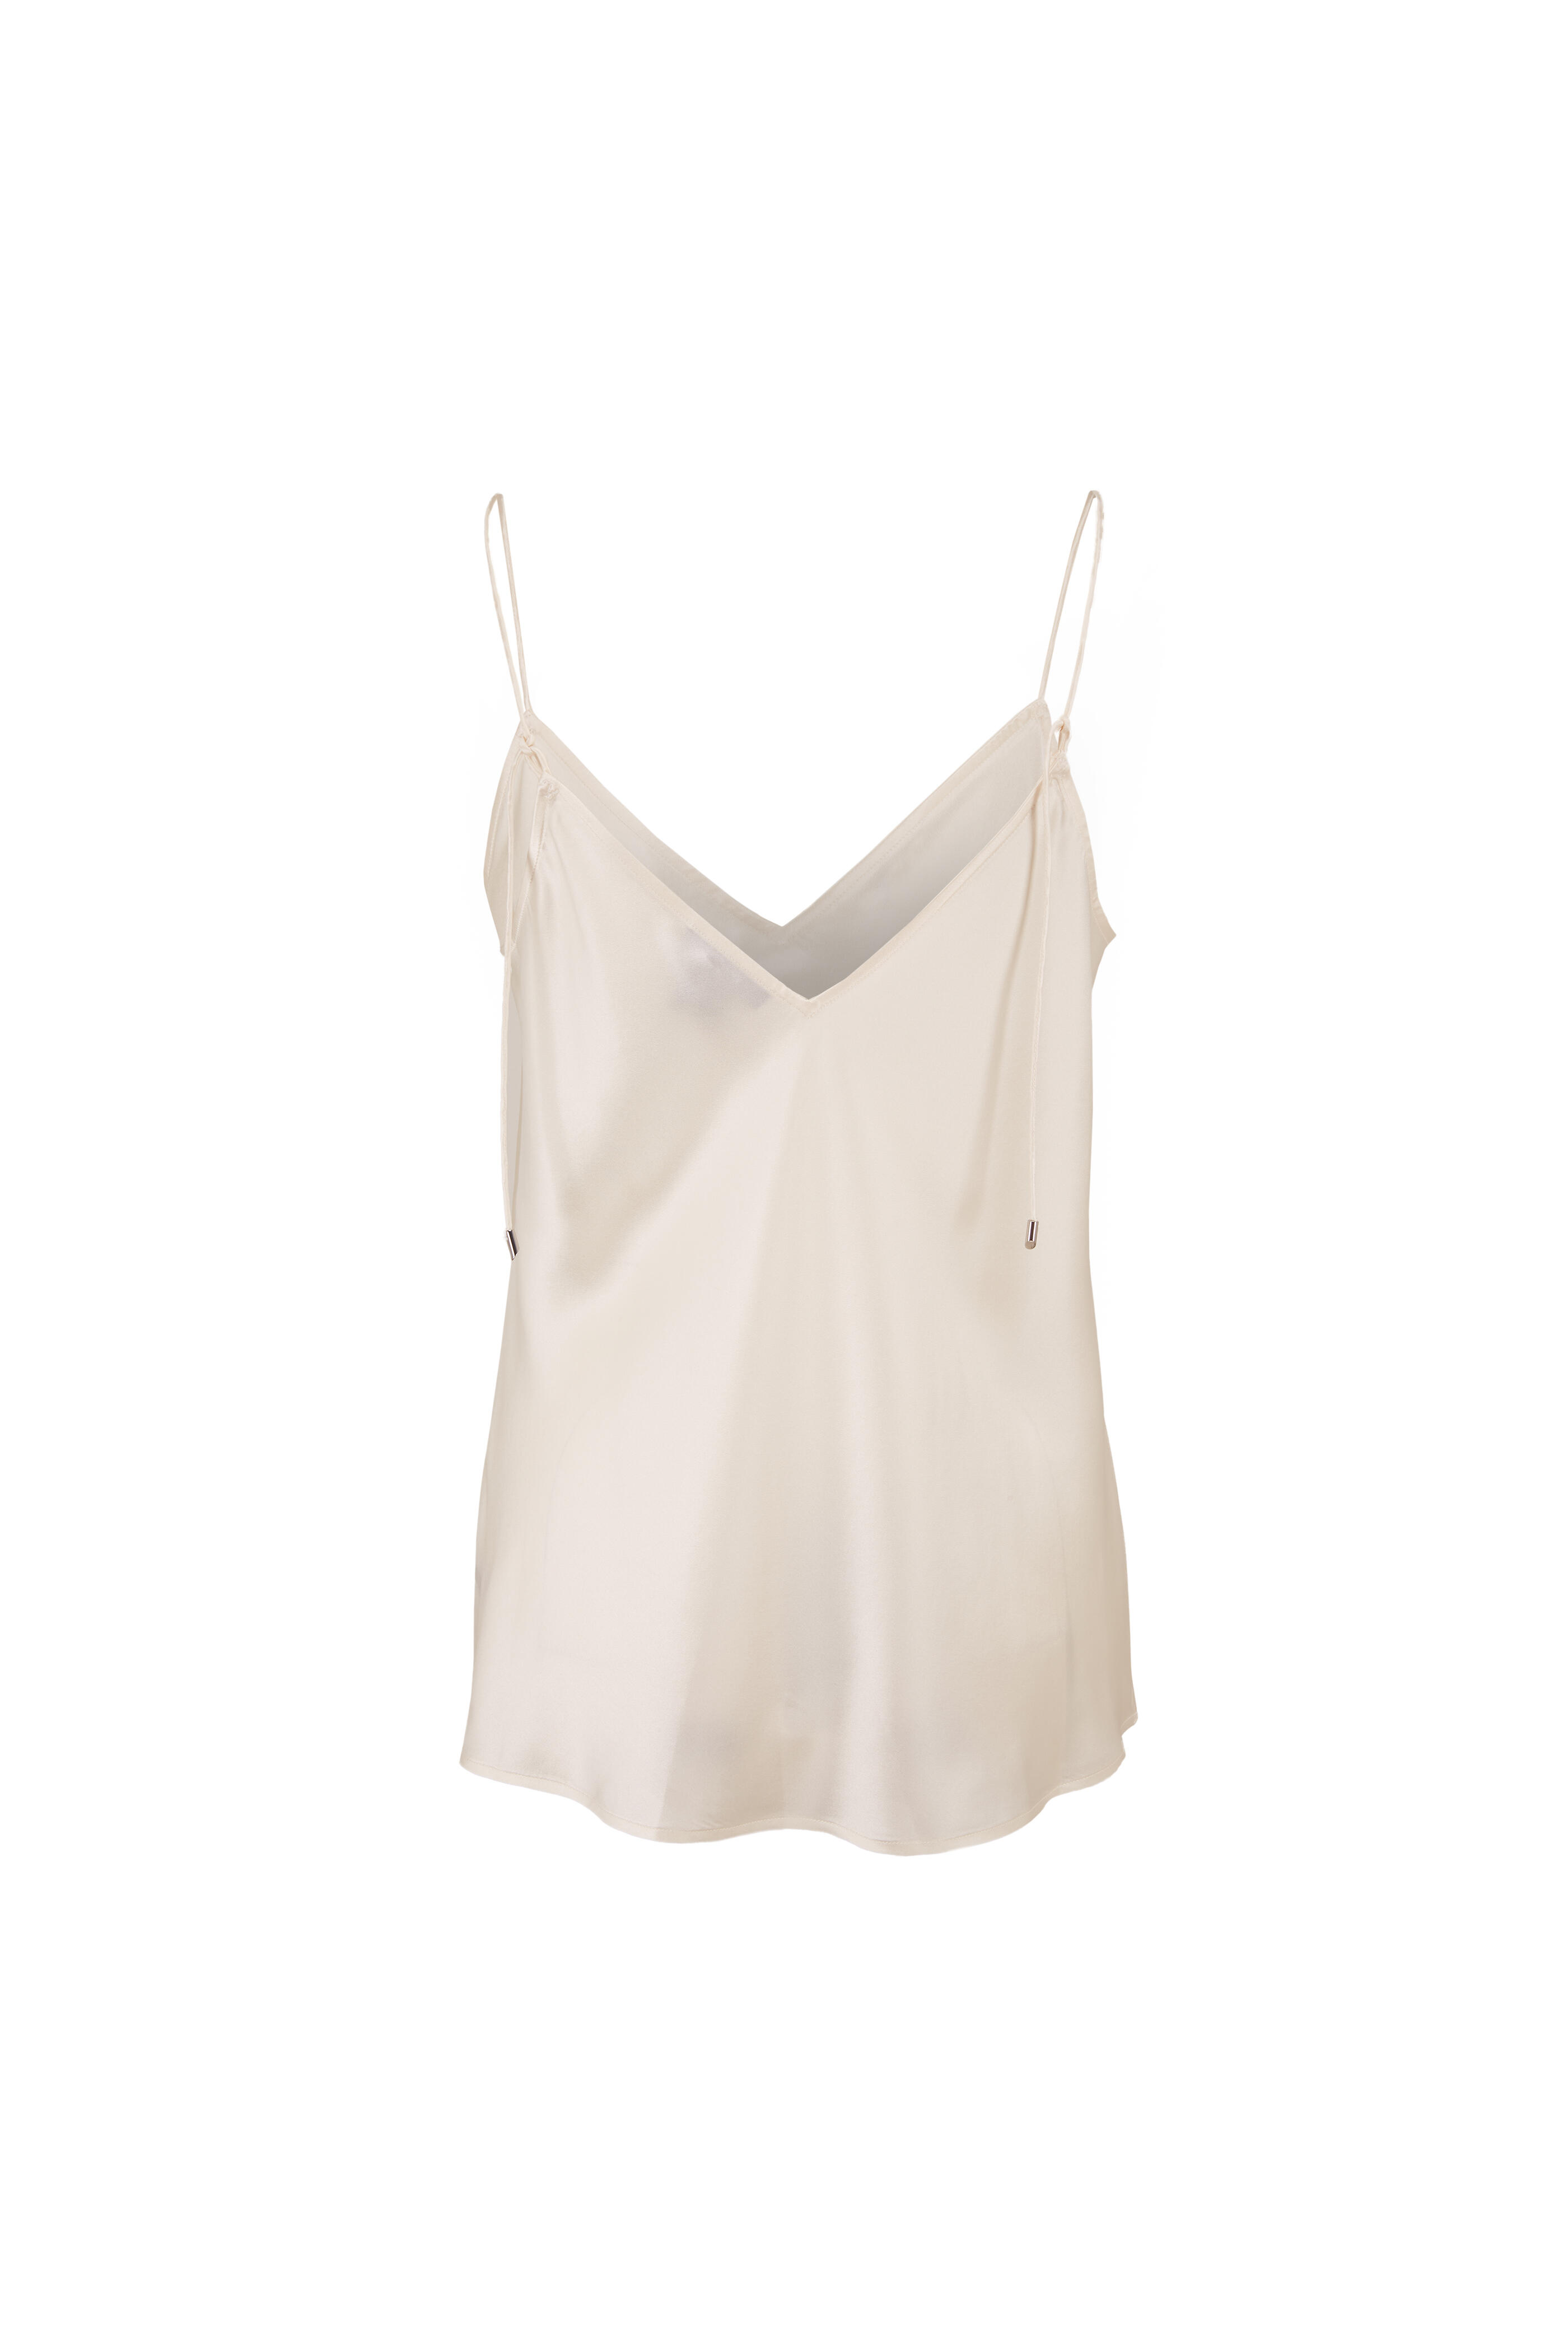 Paige - Cicely White Silk Cami | Mitchell Stores